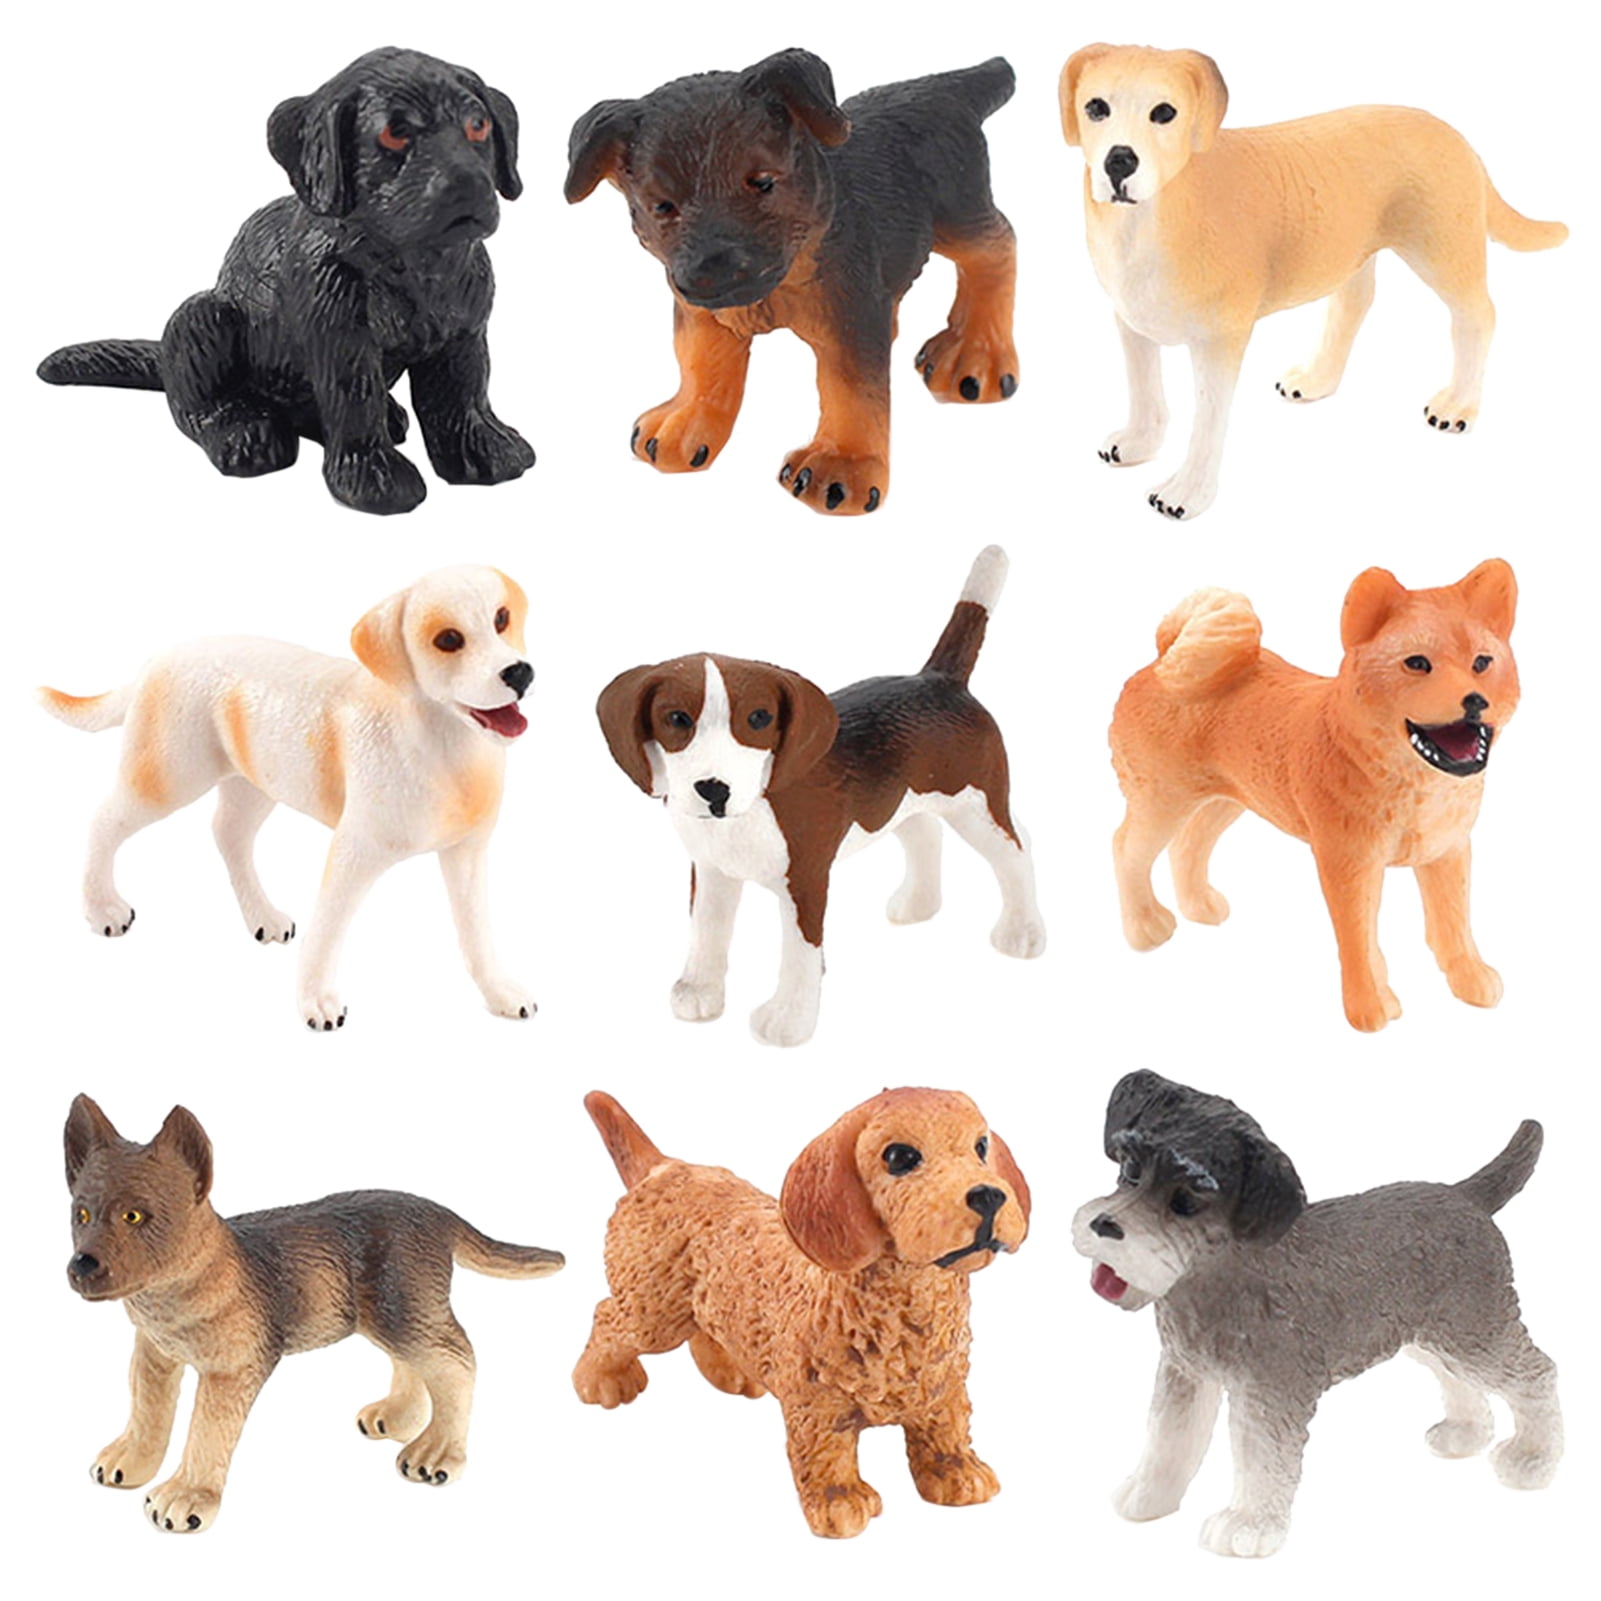 Details about   .Mojo LABRADOR PUPPY DOG cute pets farm models toys plastic figures animals NEW 